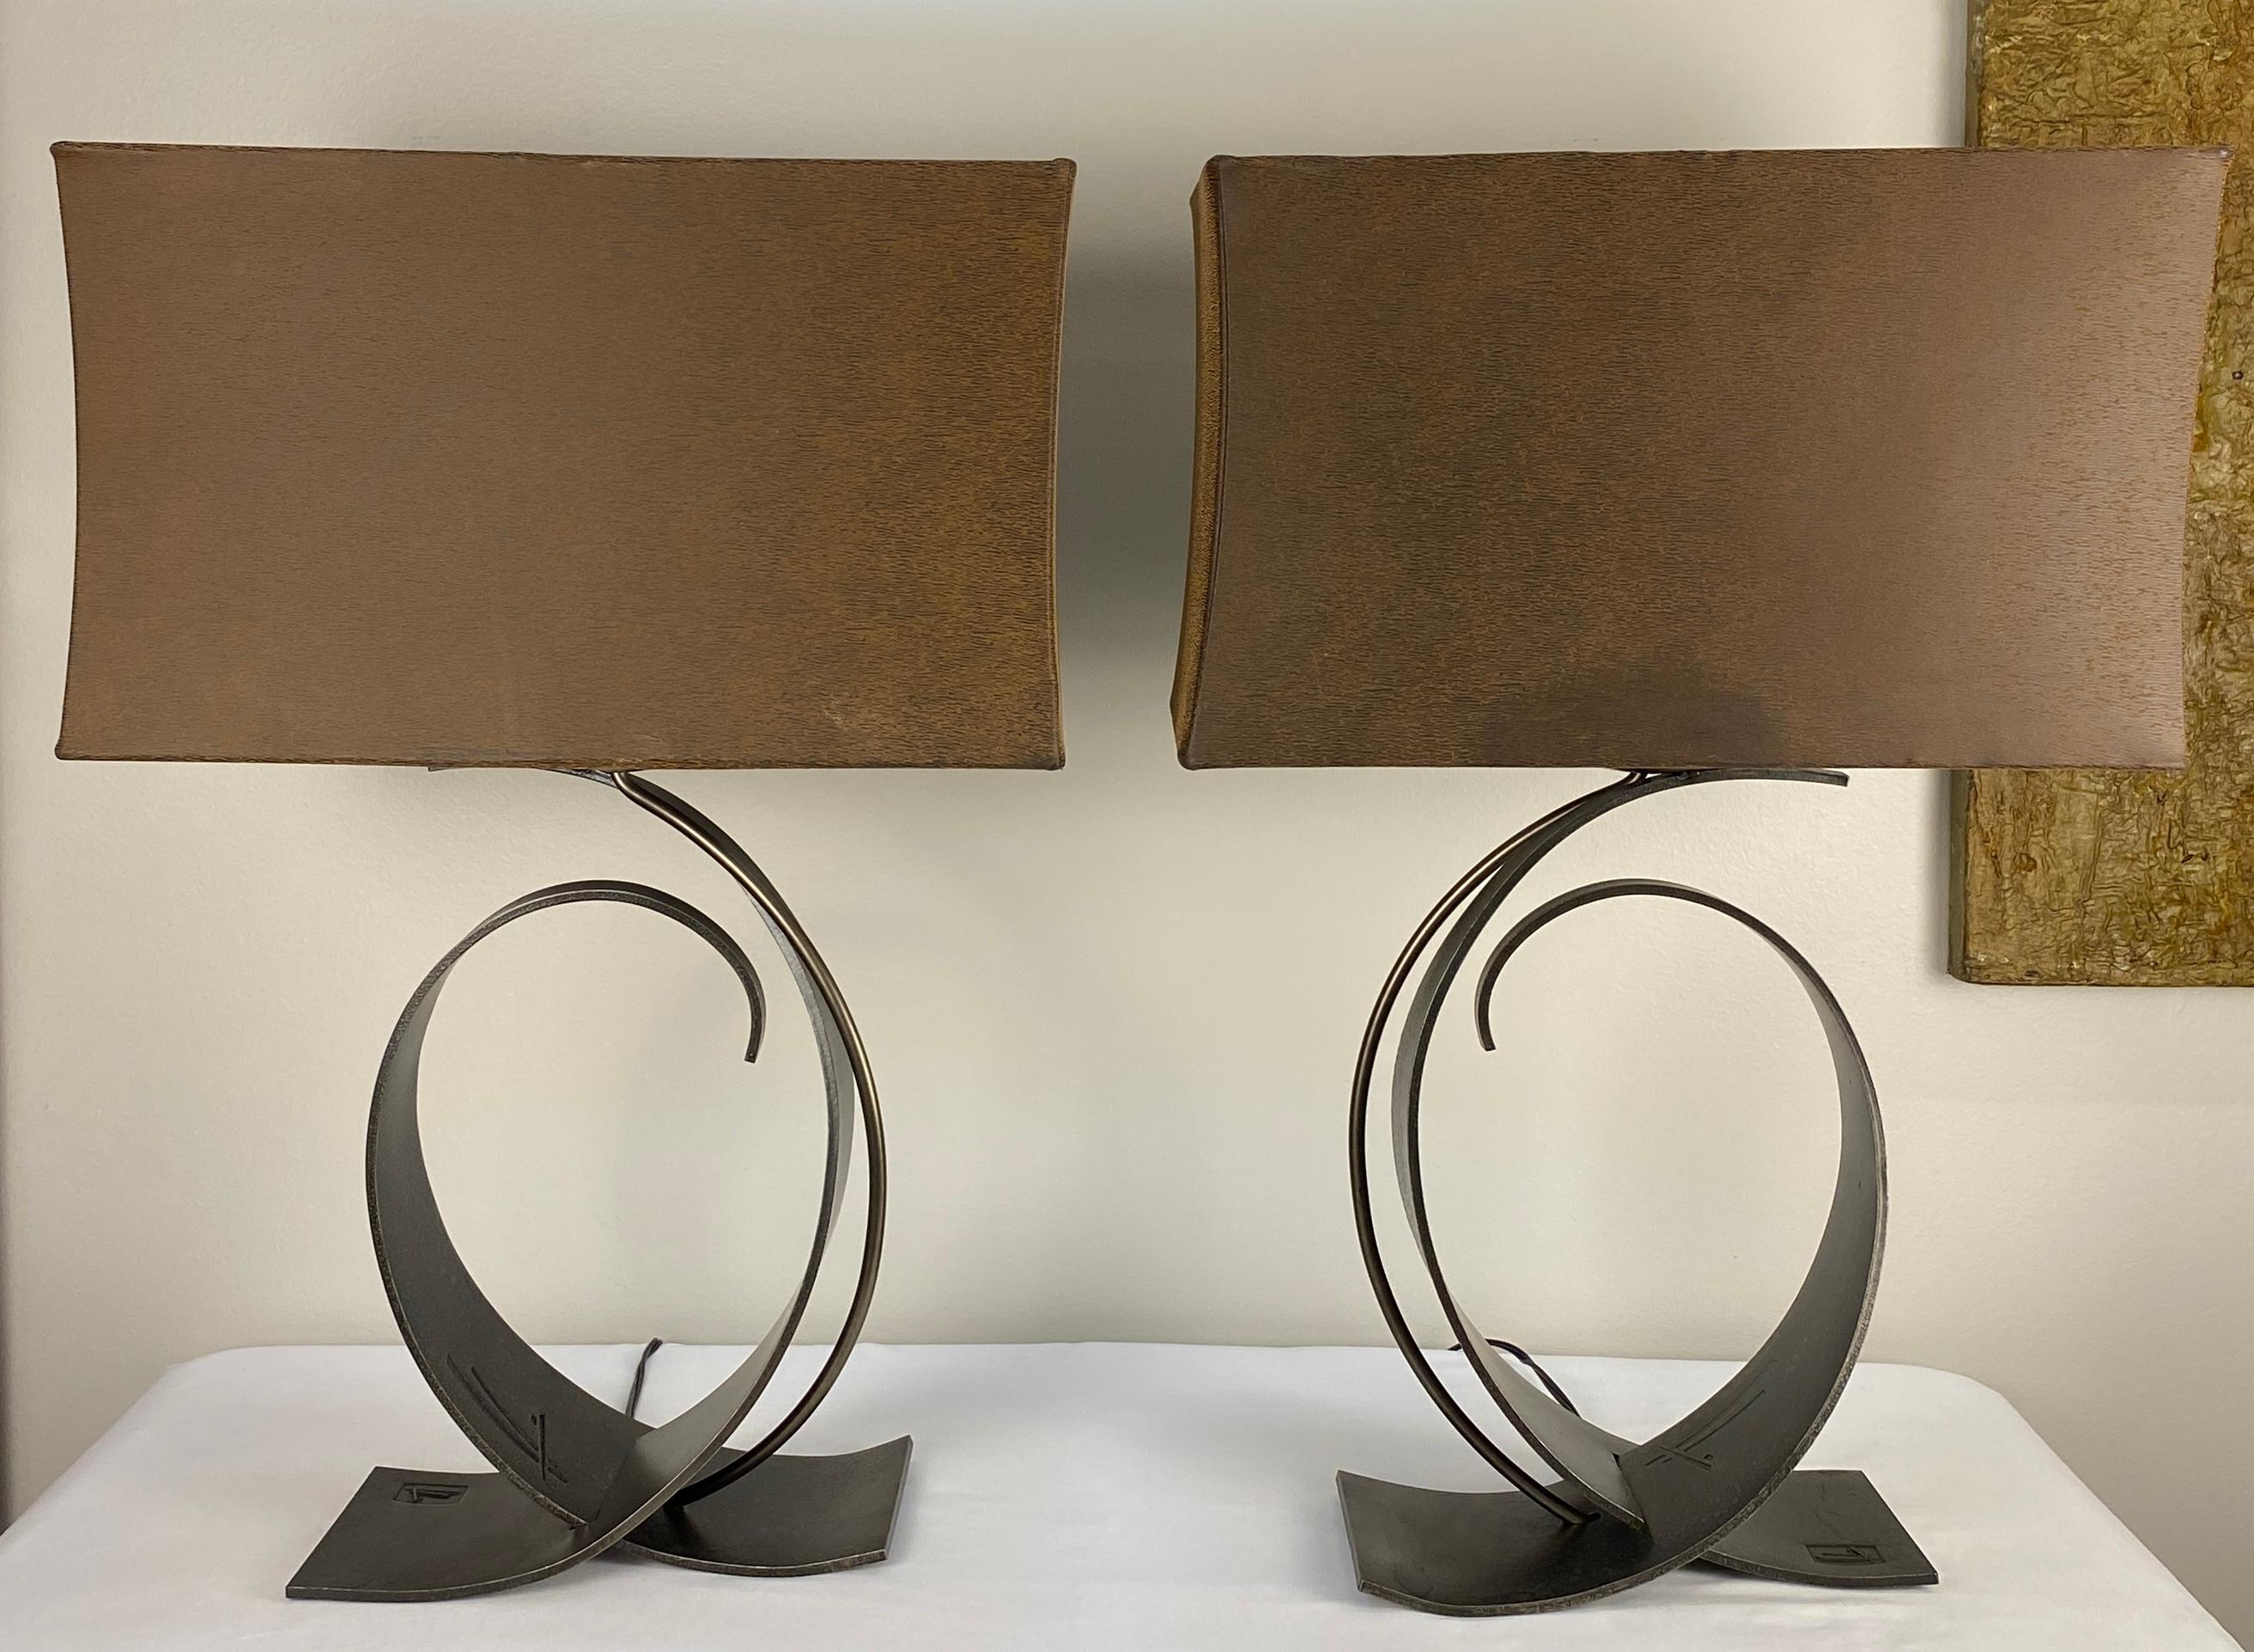 Pair of fine quality forged iron table lamps by Hubbardton. 

Feel the fluidity of Hubbardton, forged by hand in the state of Vermont. Each light fixture is inspired by Art Nouveau designers like Hector Guimard, Antonio Gaudi, and Victor Horta who